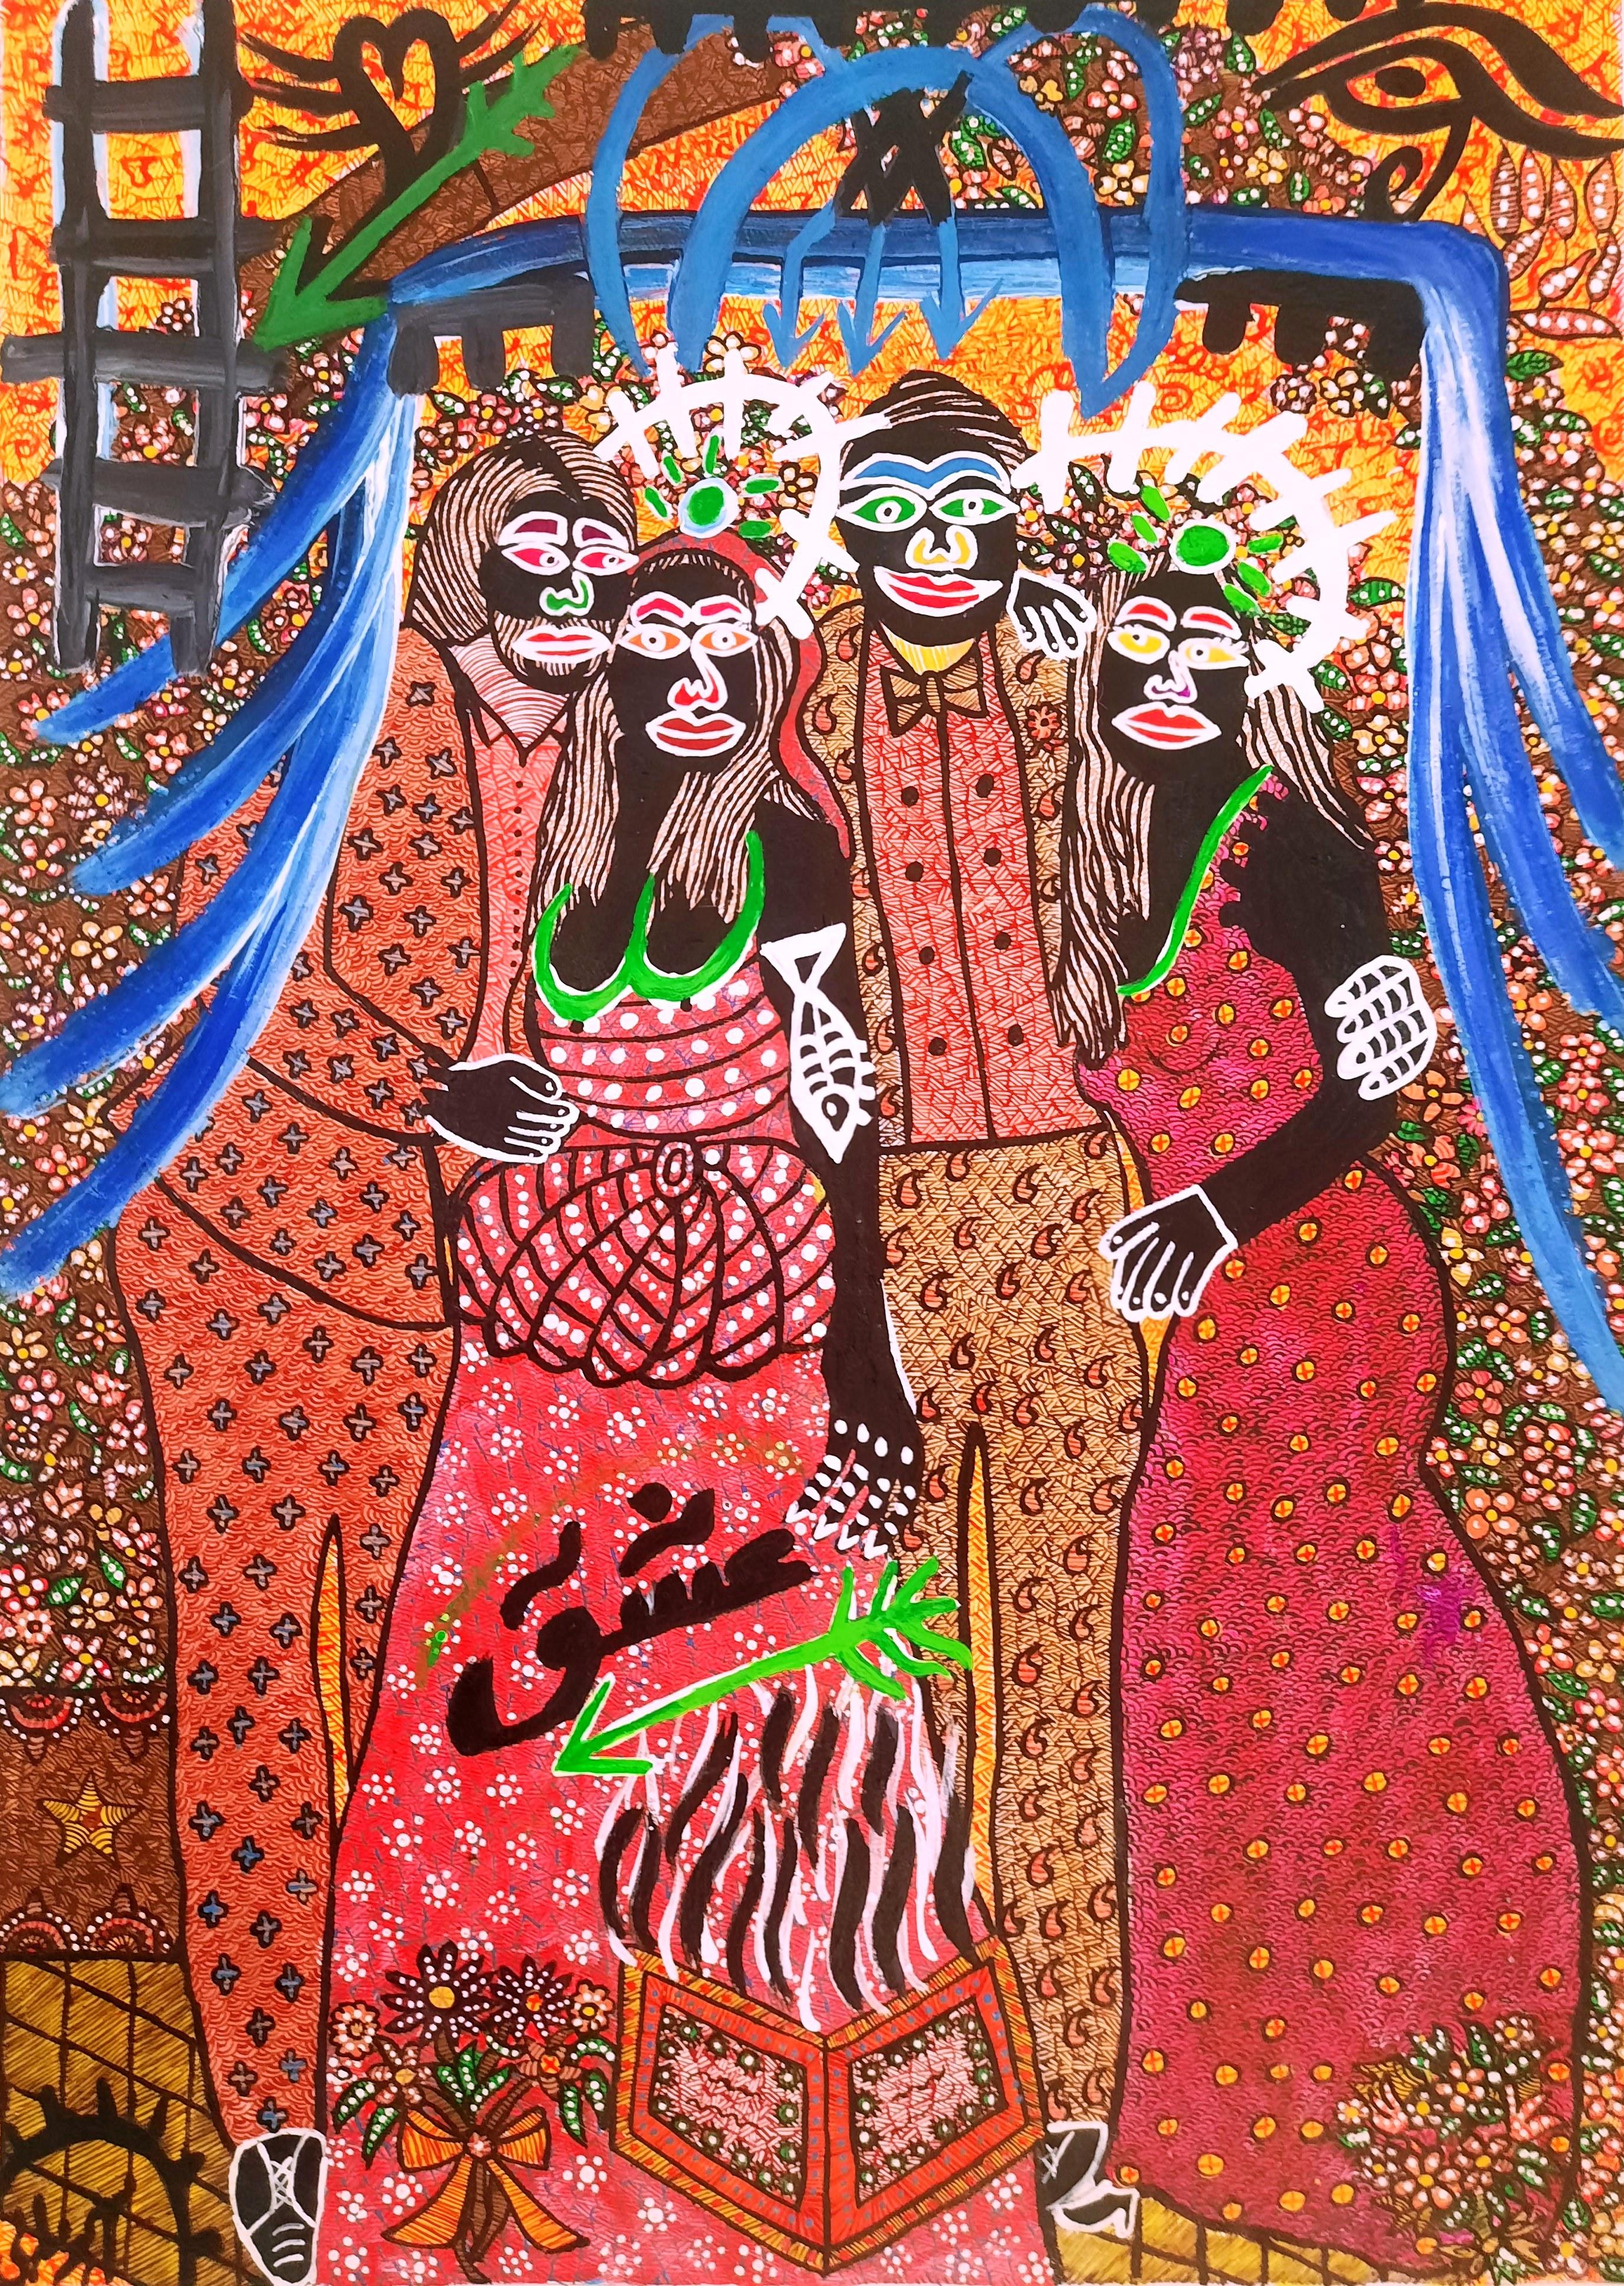 Acrylic paint on canvas
Hand-signed 
Unique work

THE THOUSAND AND ONE NIGHTS OF MOHAMMAD ARIYAEI

" Gentleness and oriental wisdom follow the supercharged bubbling to which we were accustomed from the previous deliberately art brut exhibition by